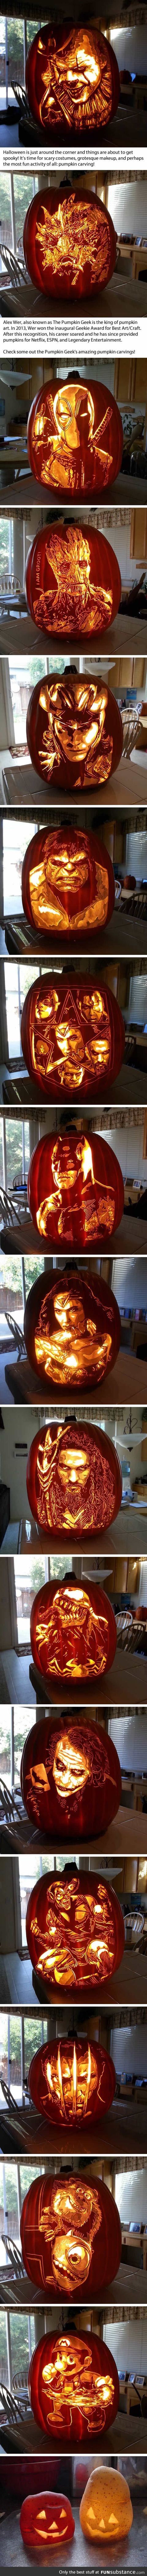 Artist carves iconic pop culture characters into pumpkins and the results are fascinating